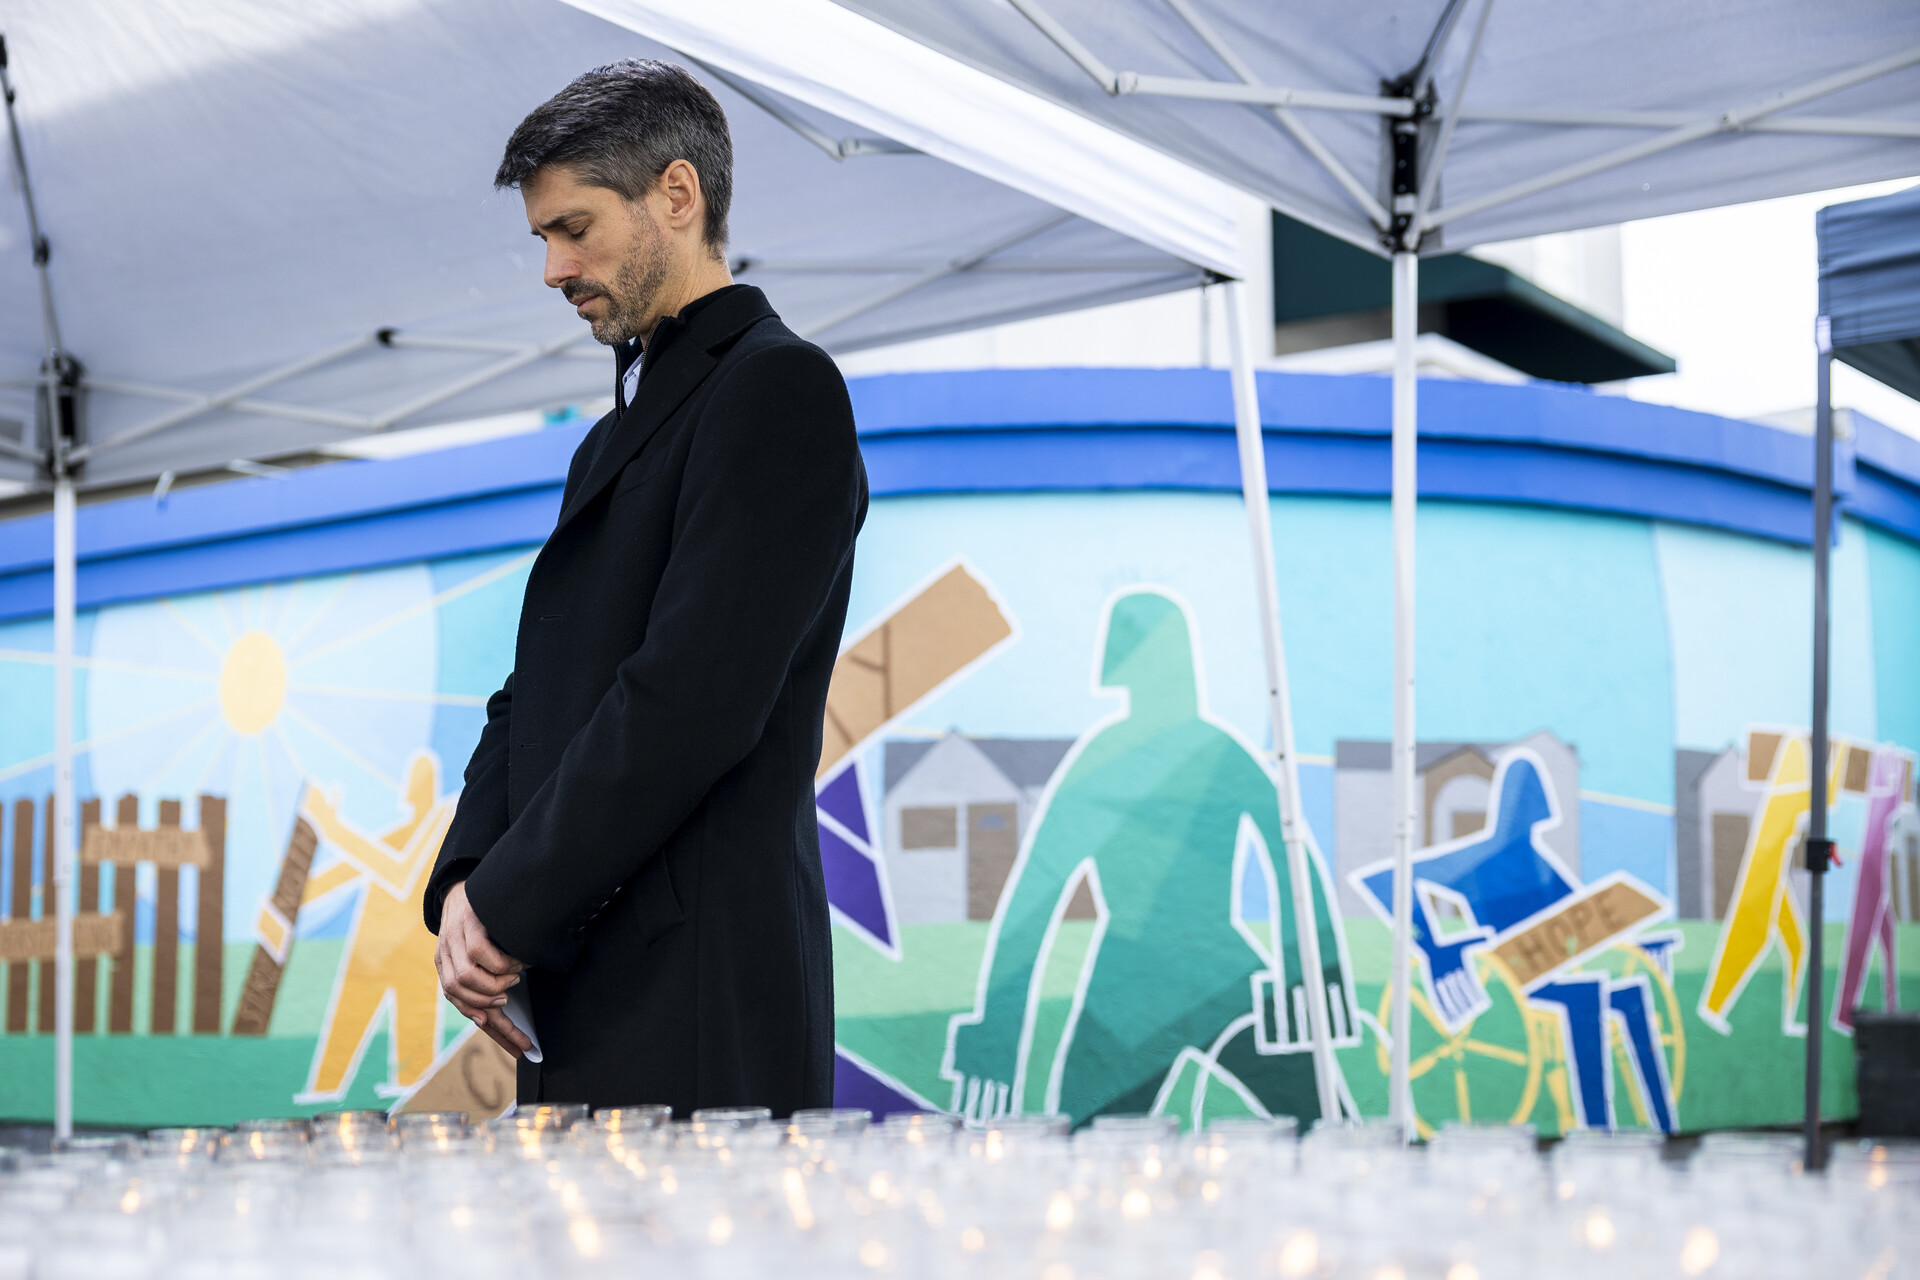 A white middle-aged man stands in a moment of silence with mural behind him outdoors under a tent.